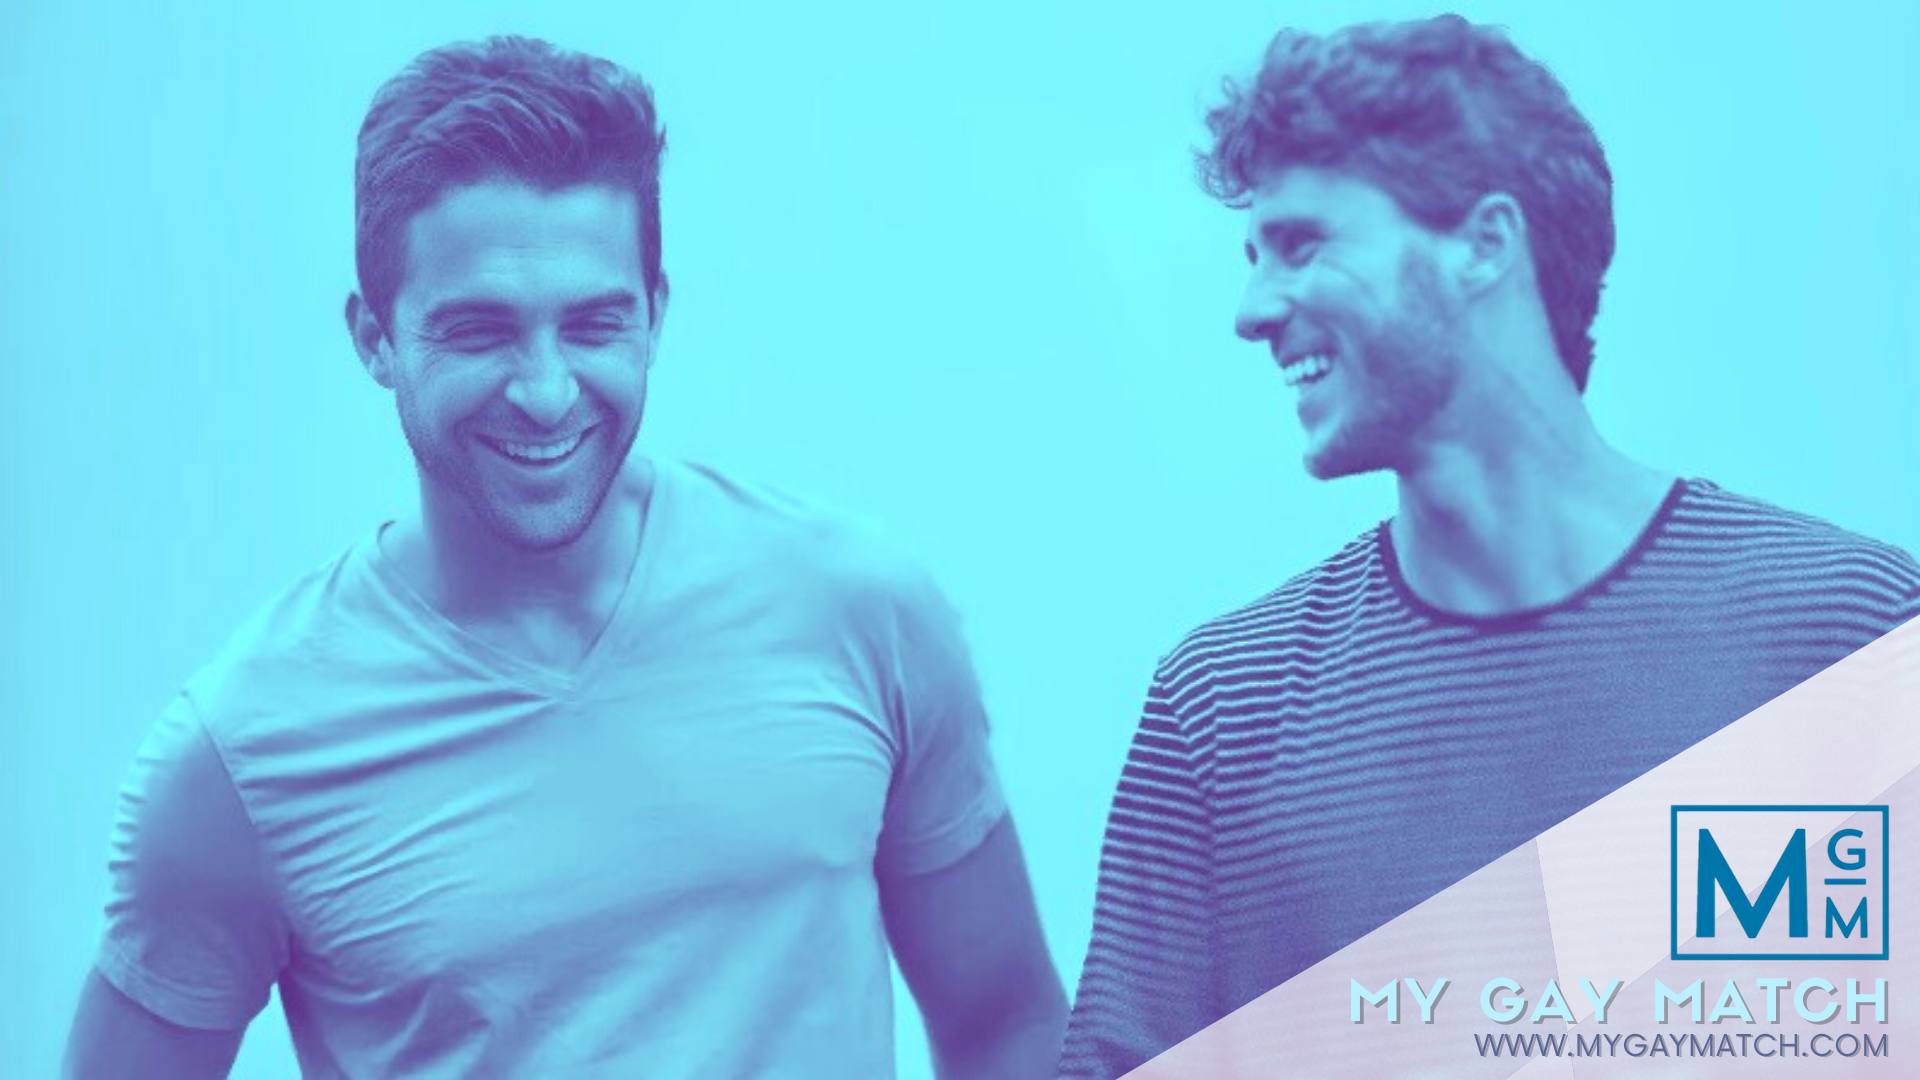 My Gay Match: Gay Dating Based On Personality image